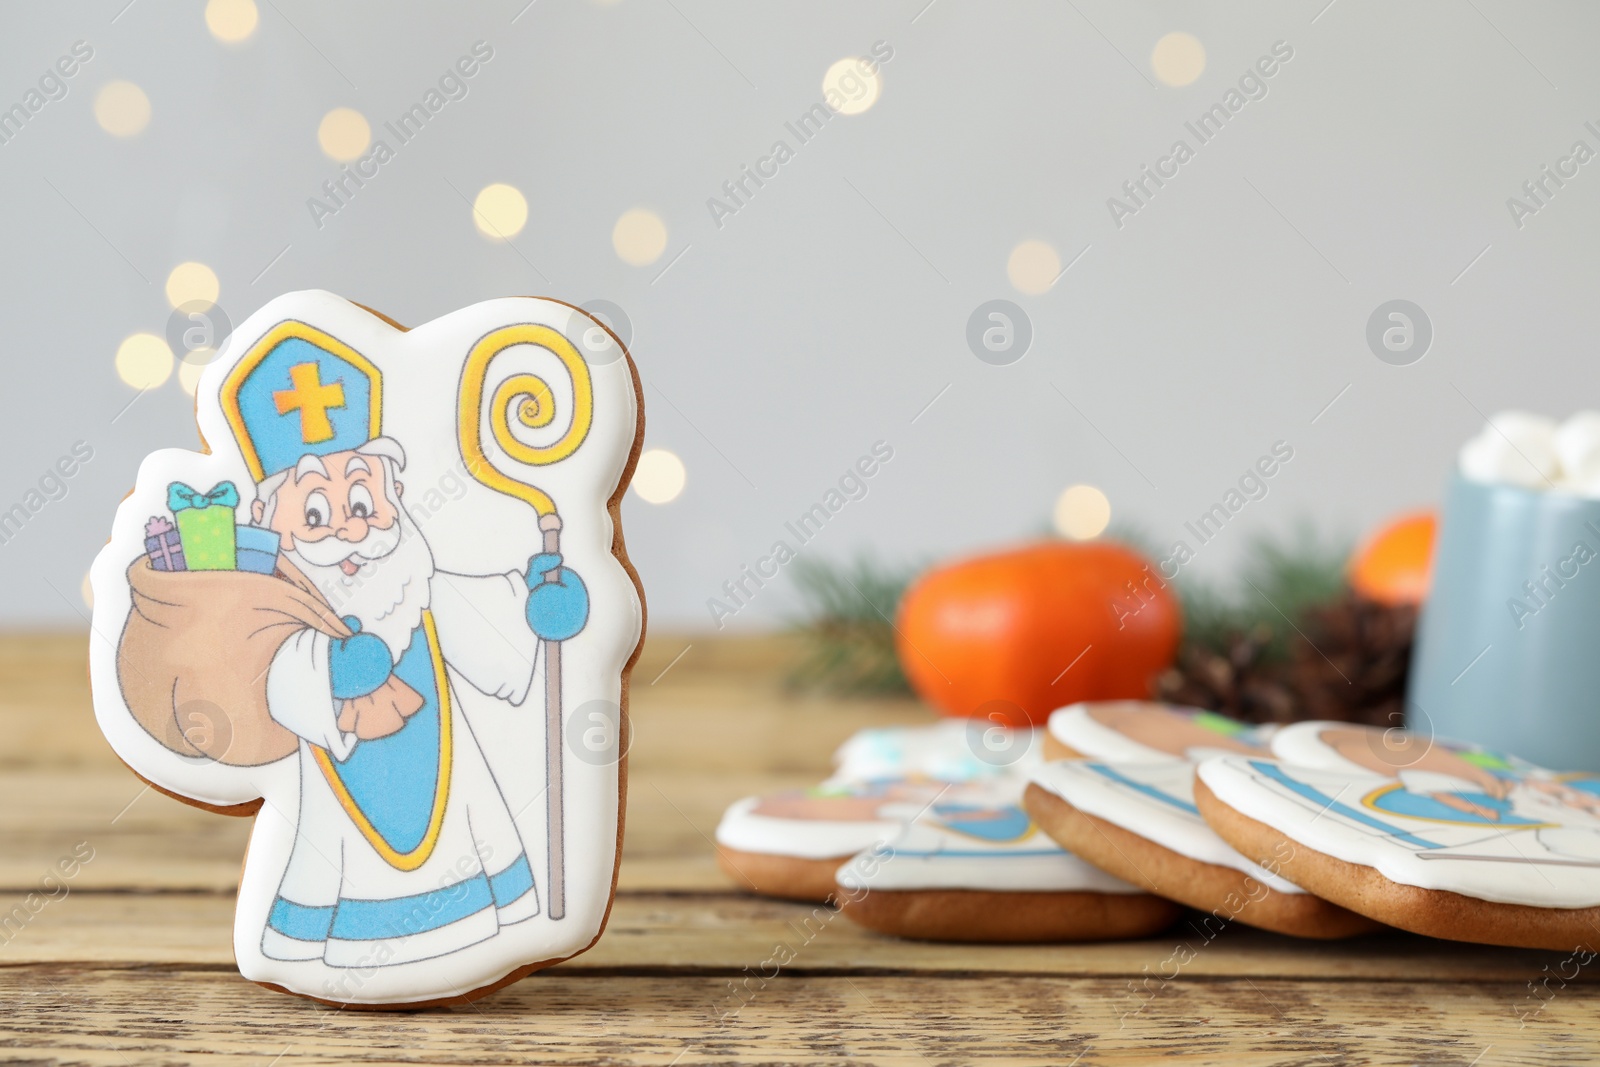 Photo of Delicious gingerbread cookies on wooden table. St. Nicholas Day celebration